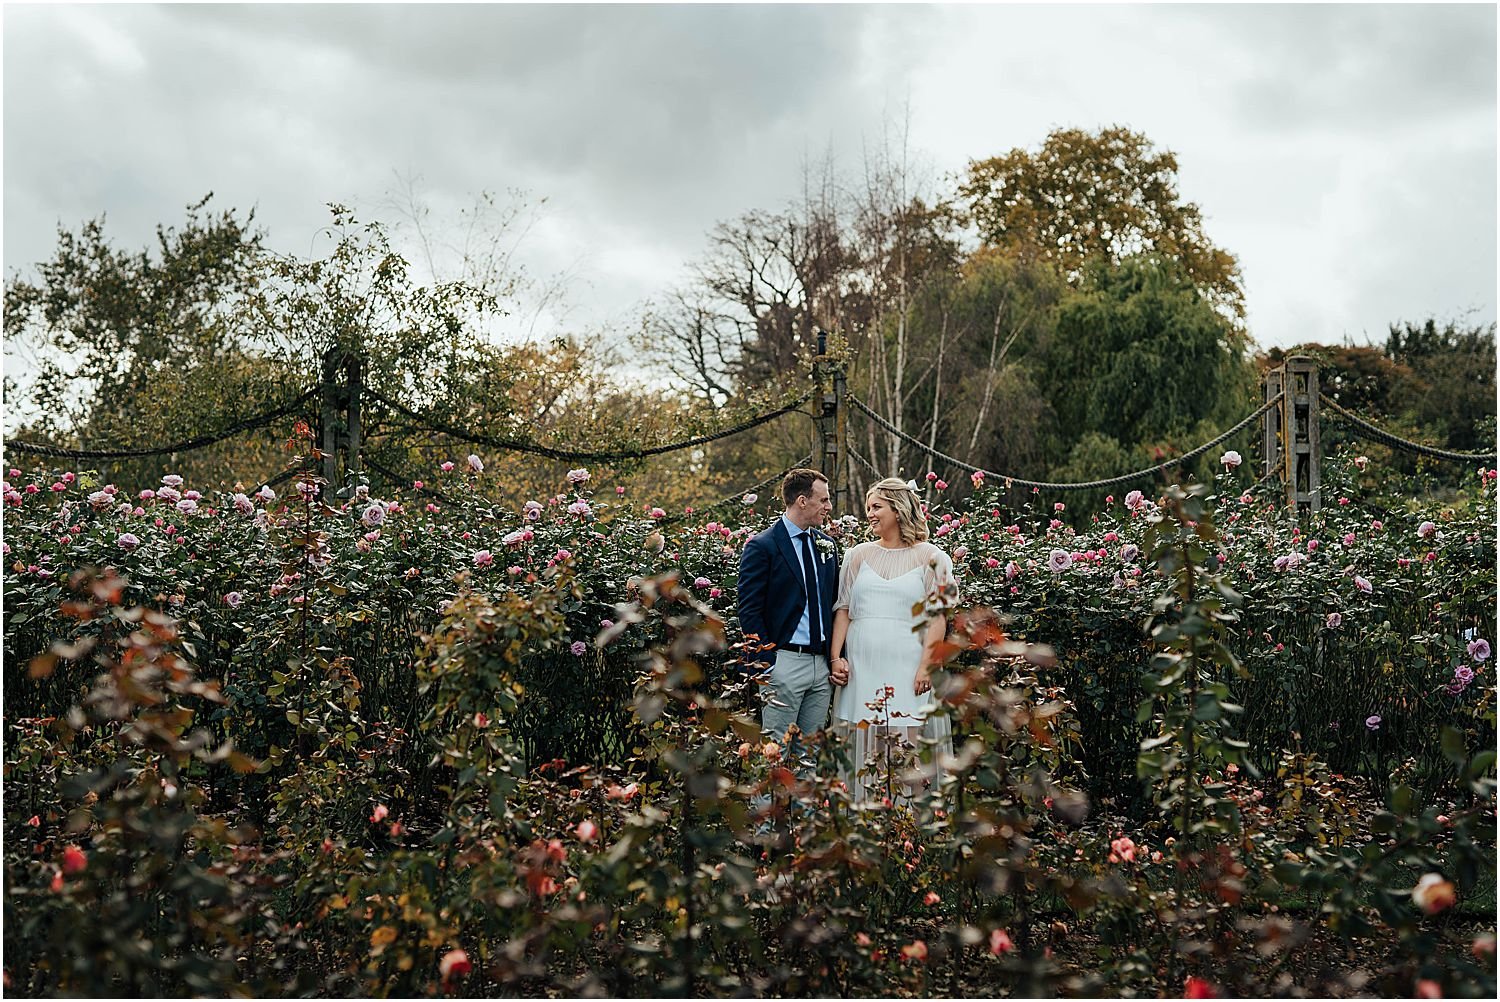 Wedding photo with roses in Regents Park